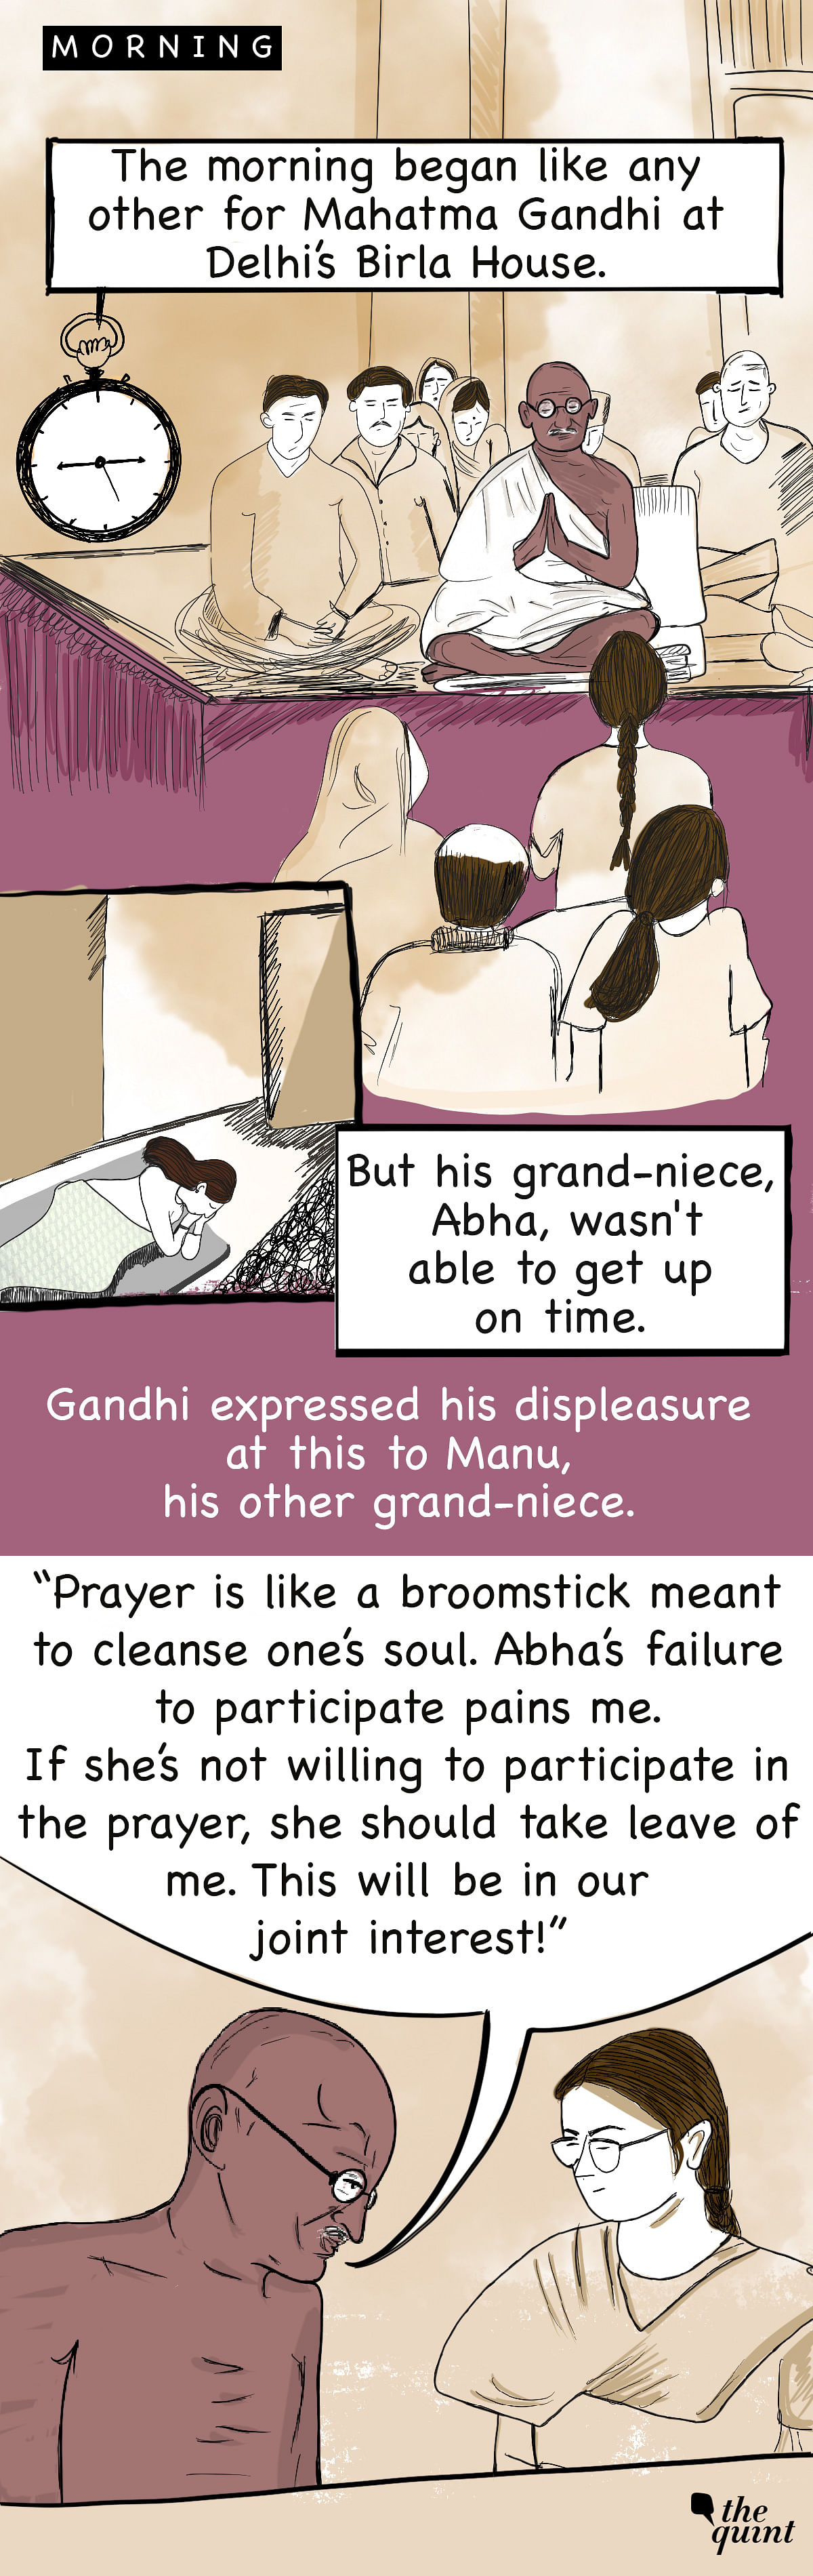 30 January 1948 went along like any other day for Mahatma Gandhi, until 5:17 pm when Godse shot at him three times.